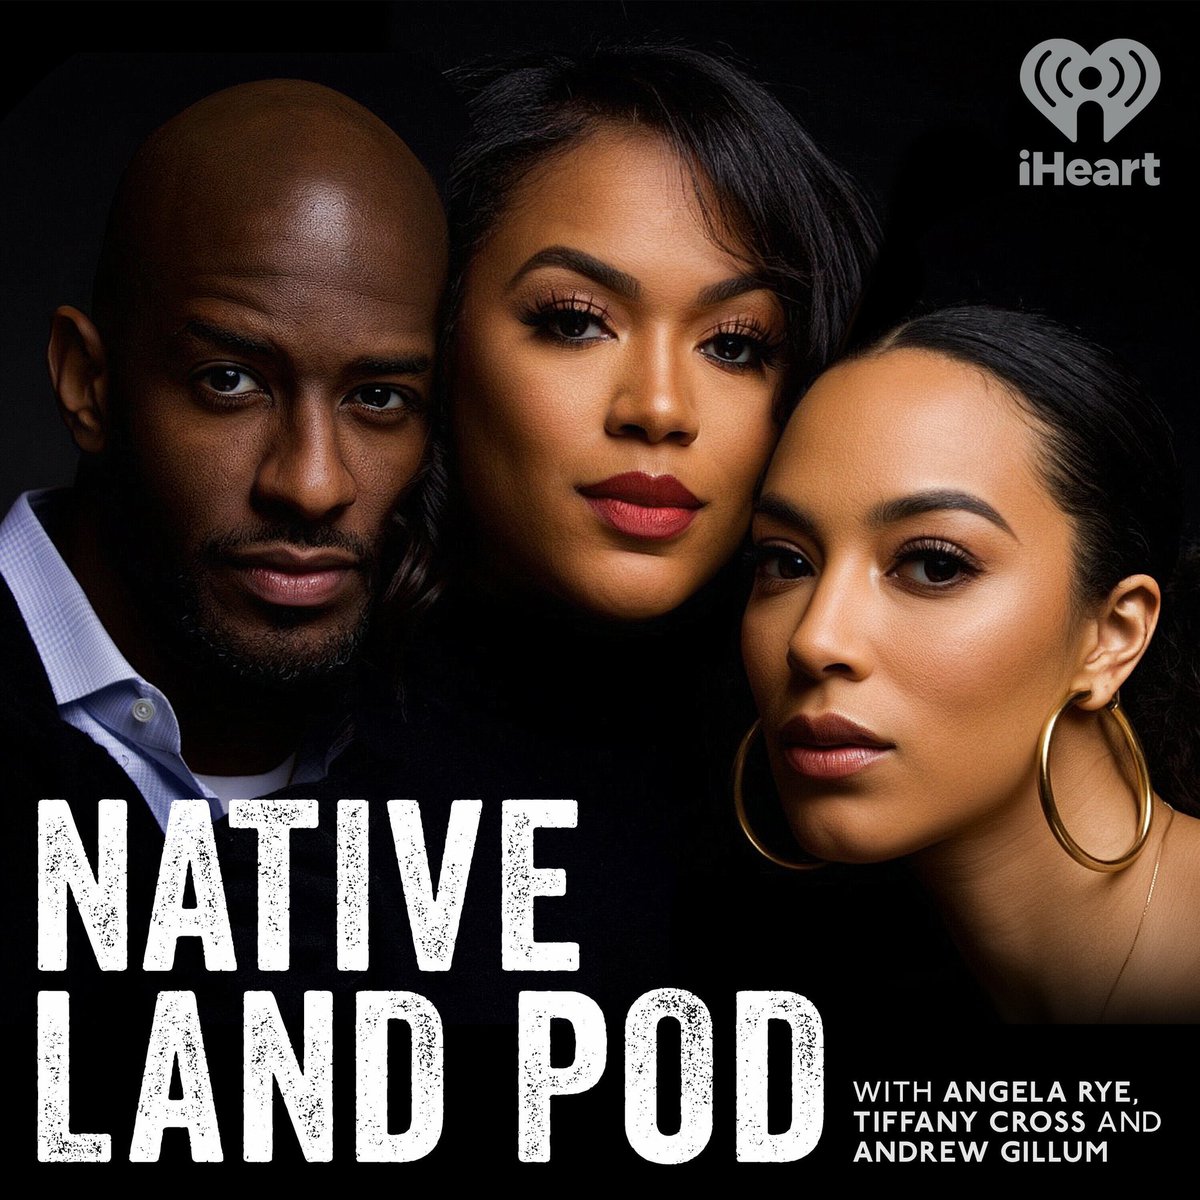 good morning to Angela Rye, Tiffany Cross and Andrew Gillum only 😭 for them coming together and creating a space like “native land pod”. I genuinely look forward to the conversations surrounding black political and socio economic well being. The calls to action, resources and